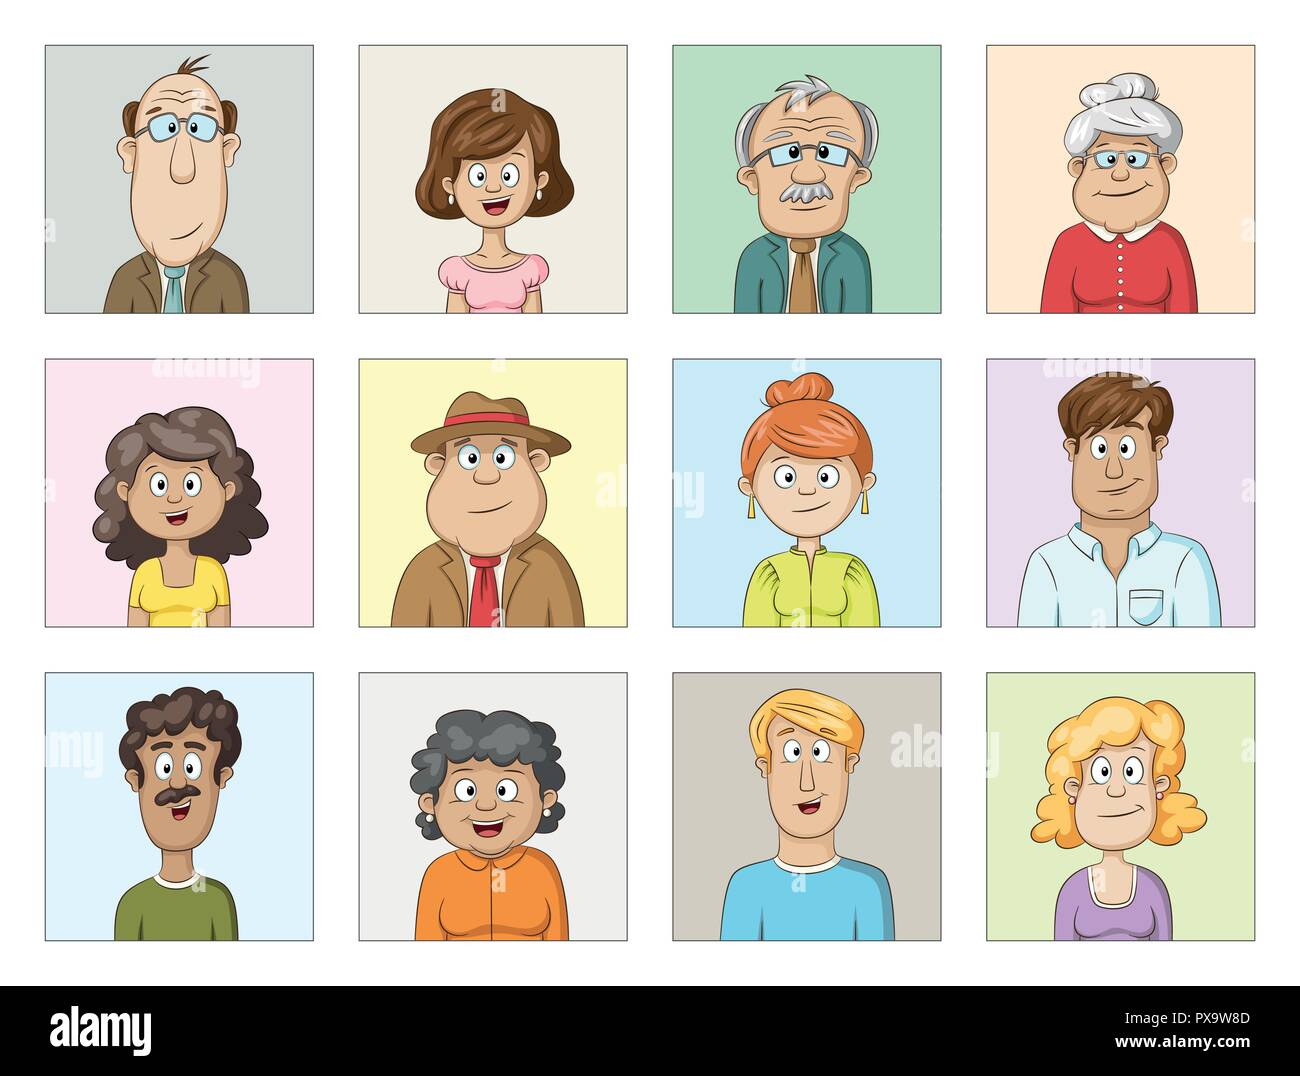 Cartoon characters avatars collection, people of different ages Stock Vector